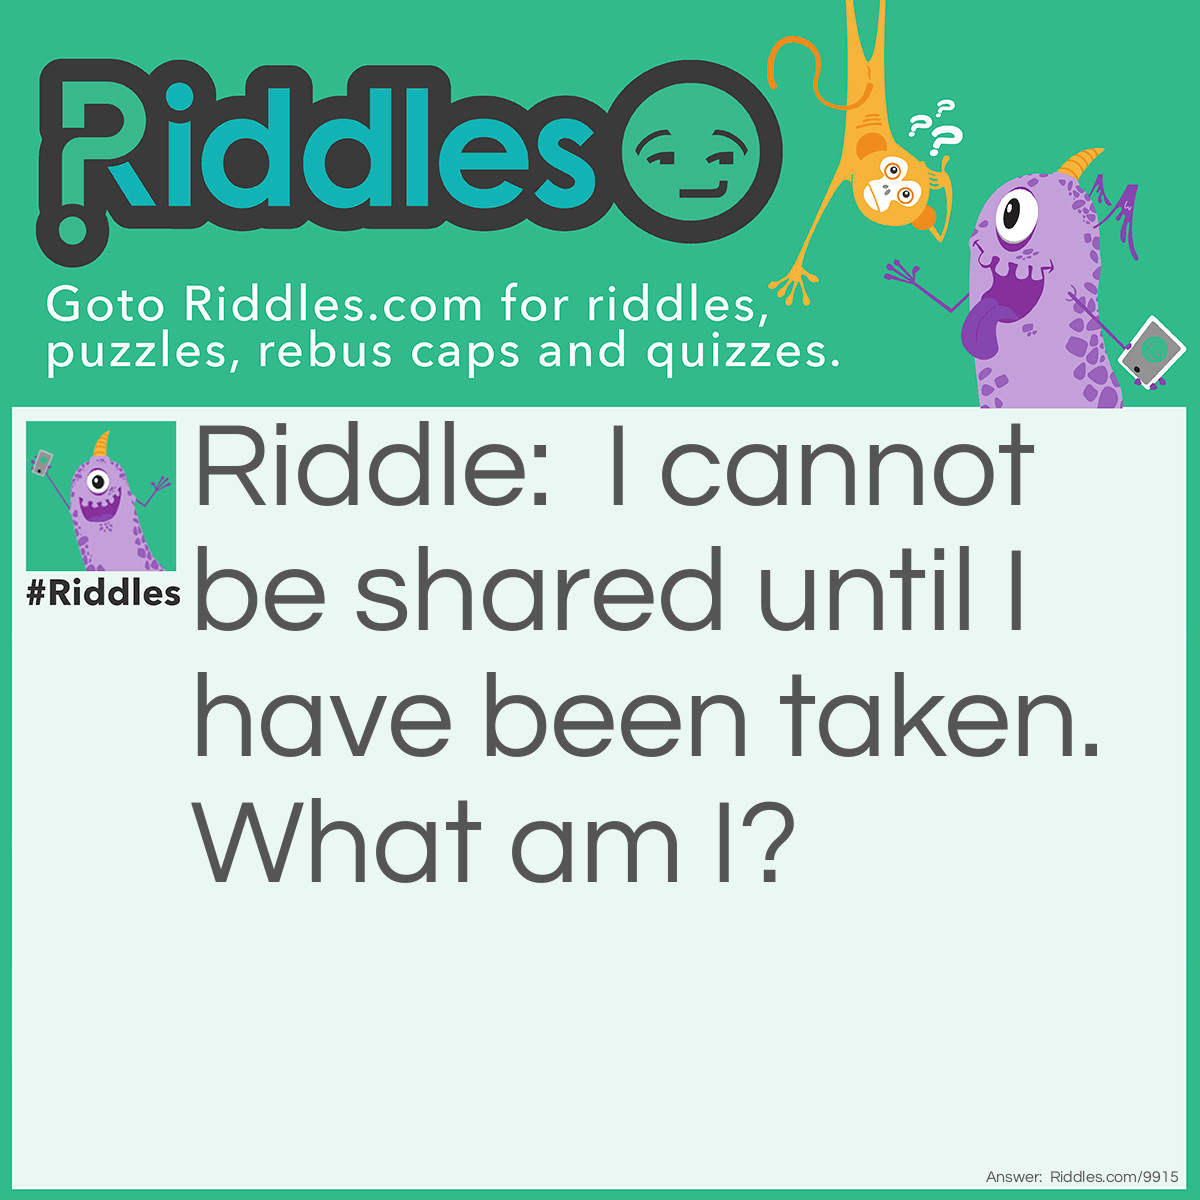 Riddle: I cannot be shared until I have been taken. What am I? Answer: A photograph! You cannot share a photograph until it has been taken.